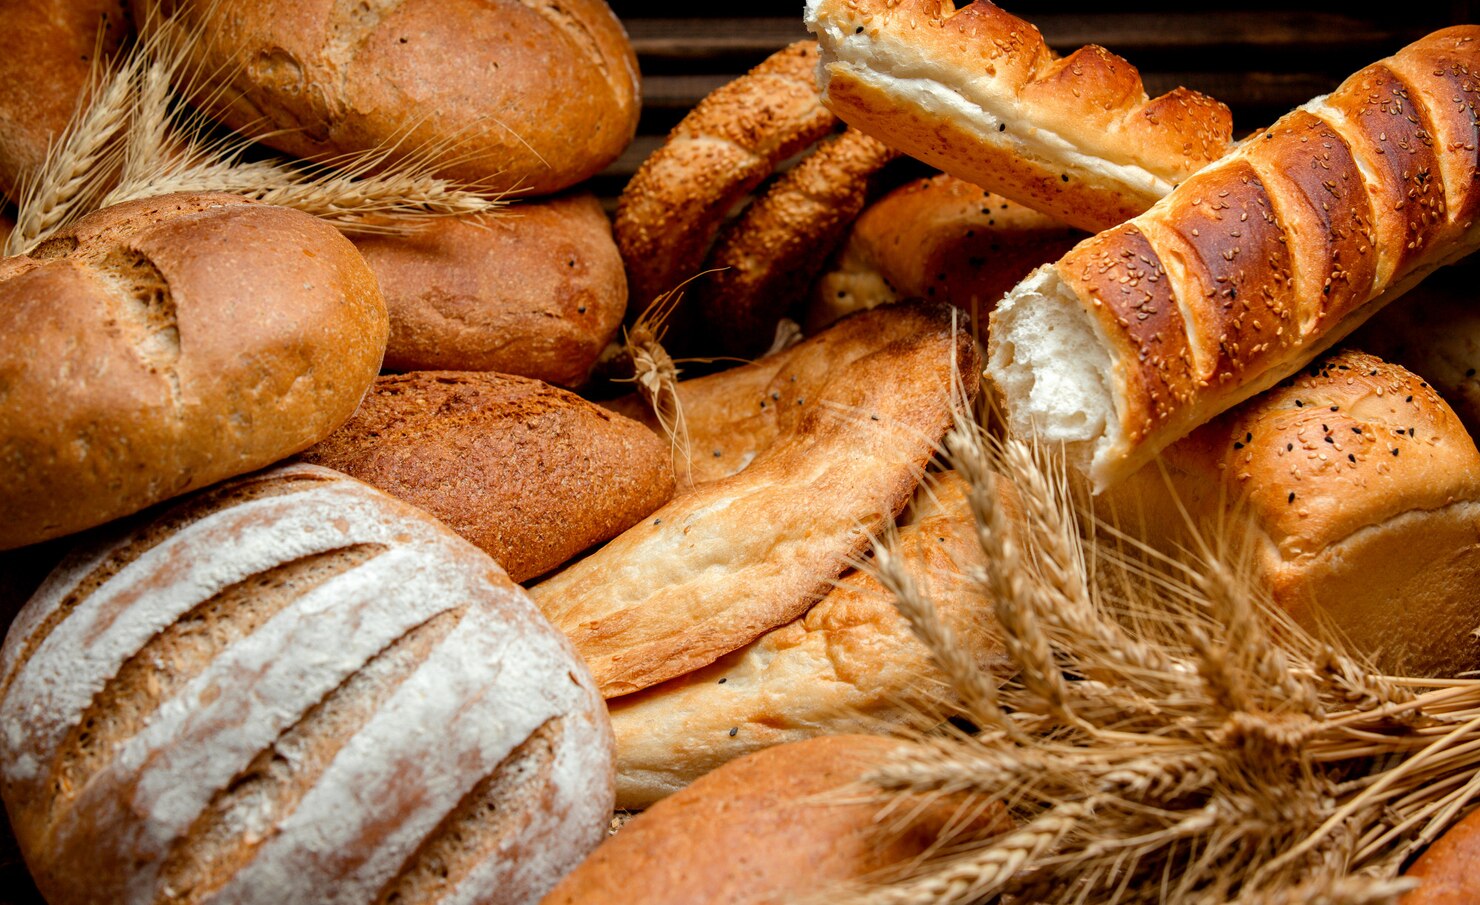 different-types-bread-made-from-wheat-flour_140725-5648.jpg